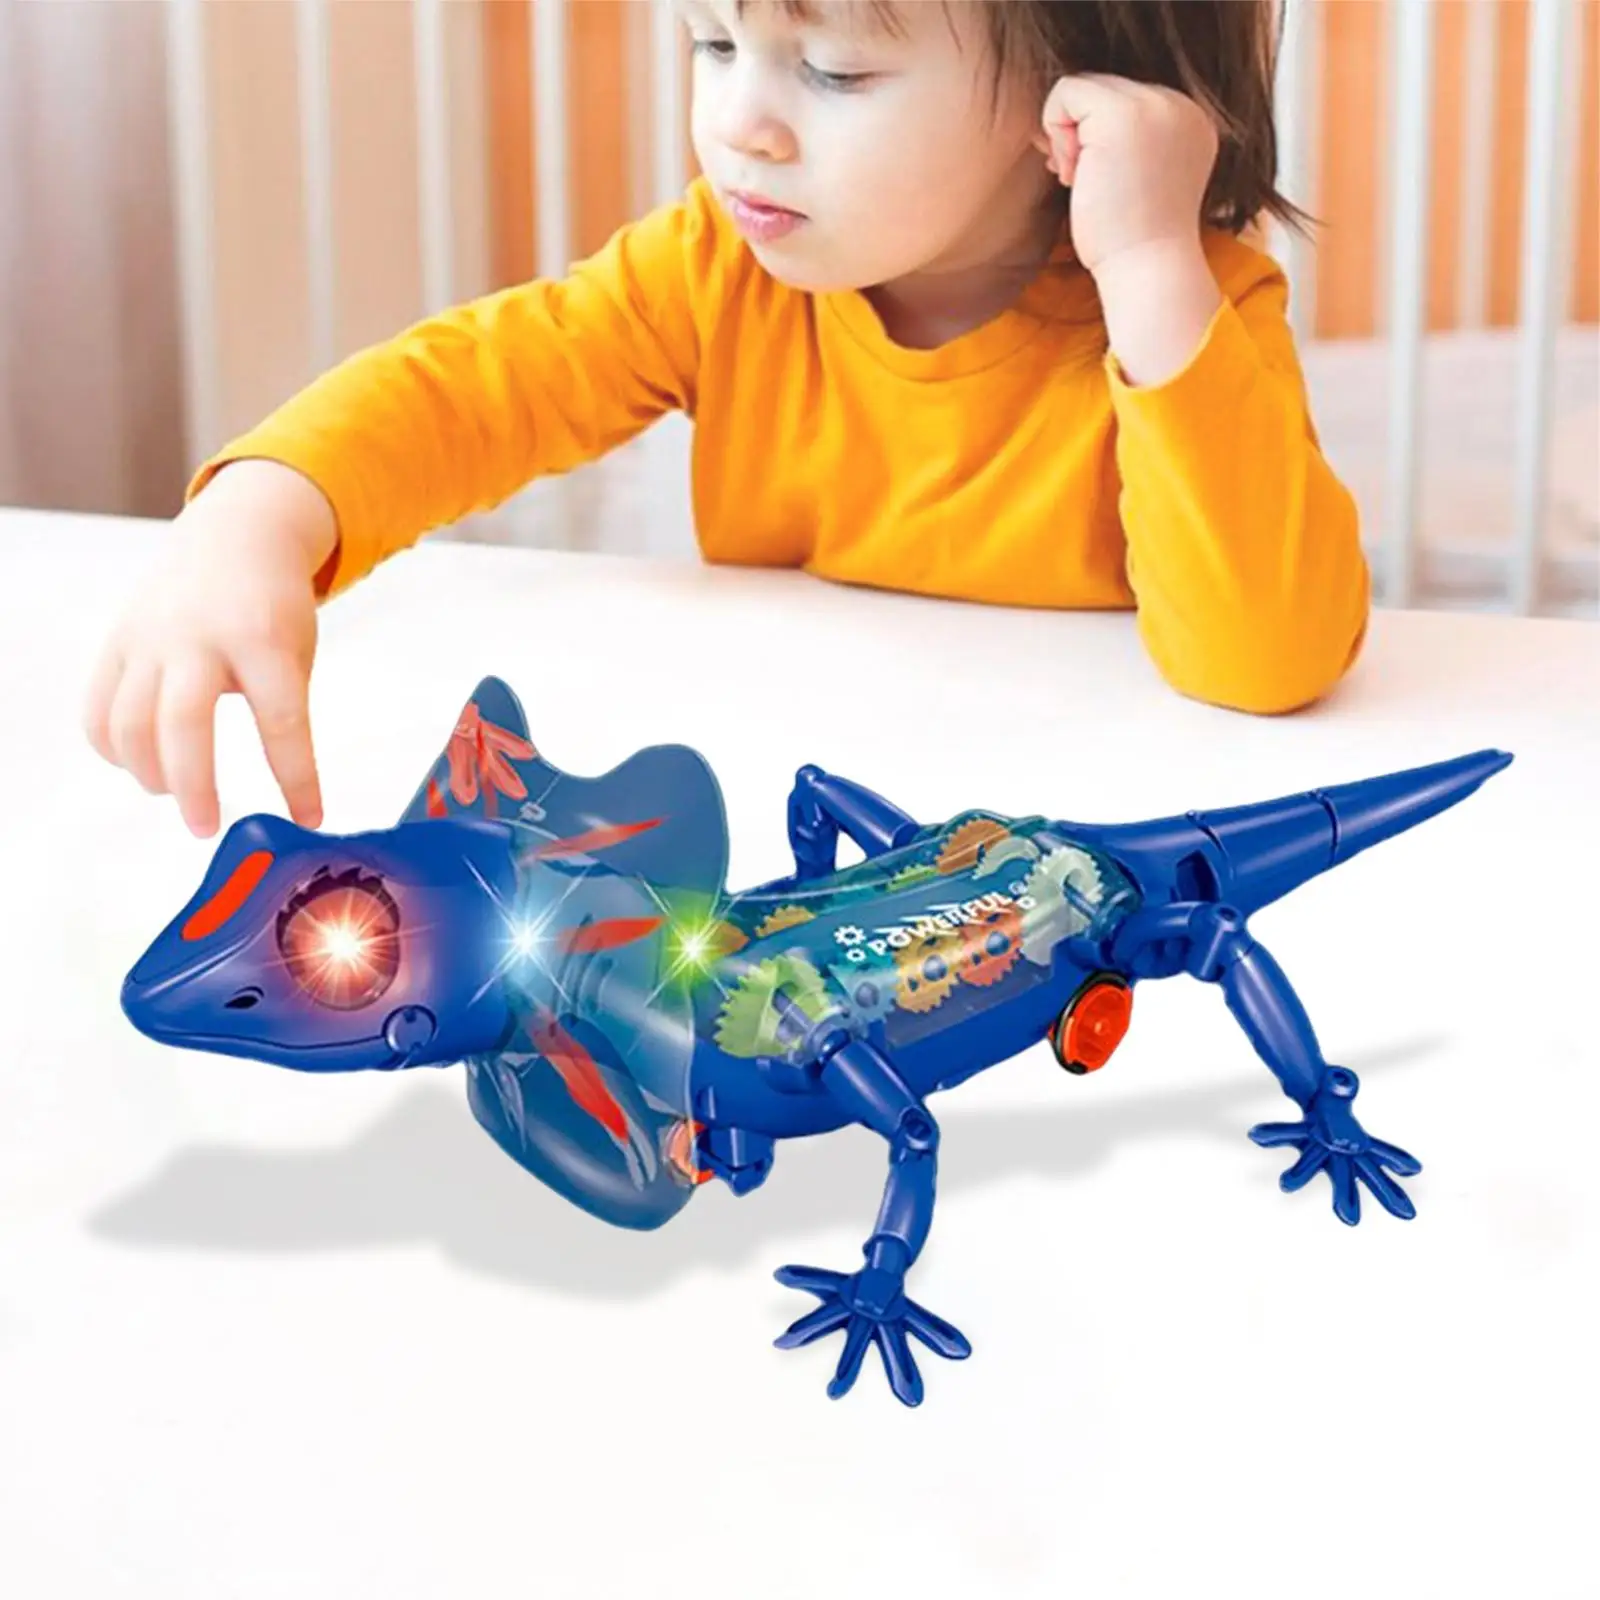 Lizard Battery Powered Robotic Toy Crawling Removable Tail Trick Toy Gift